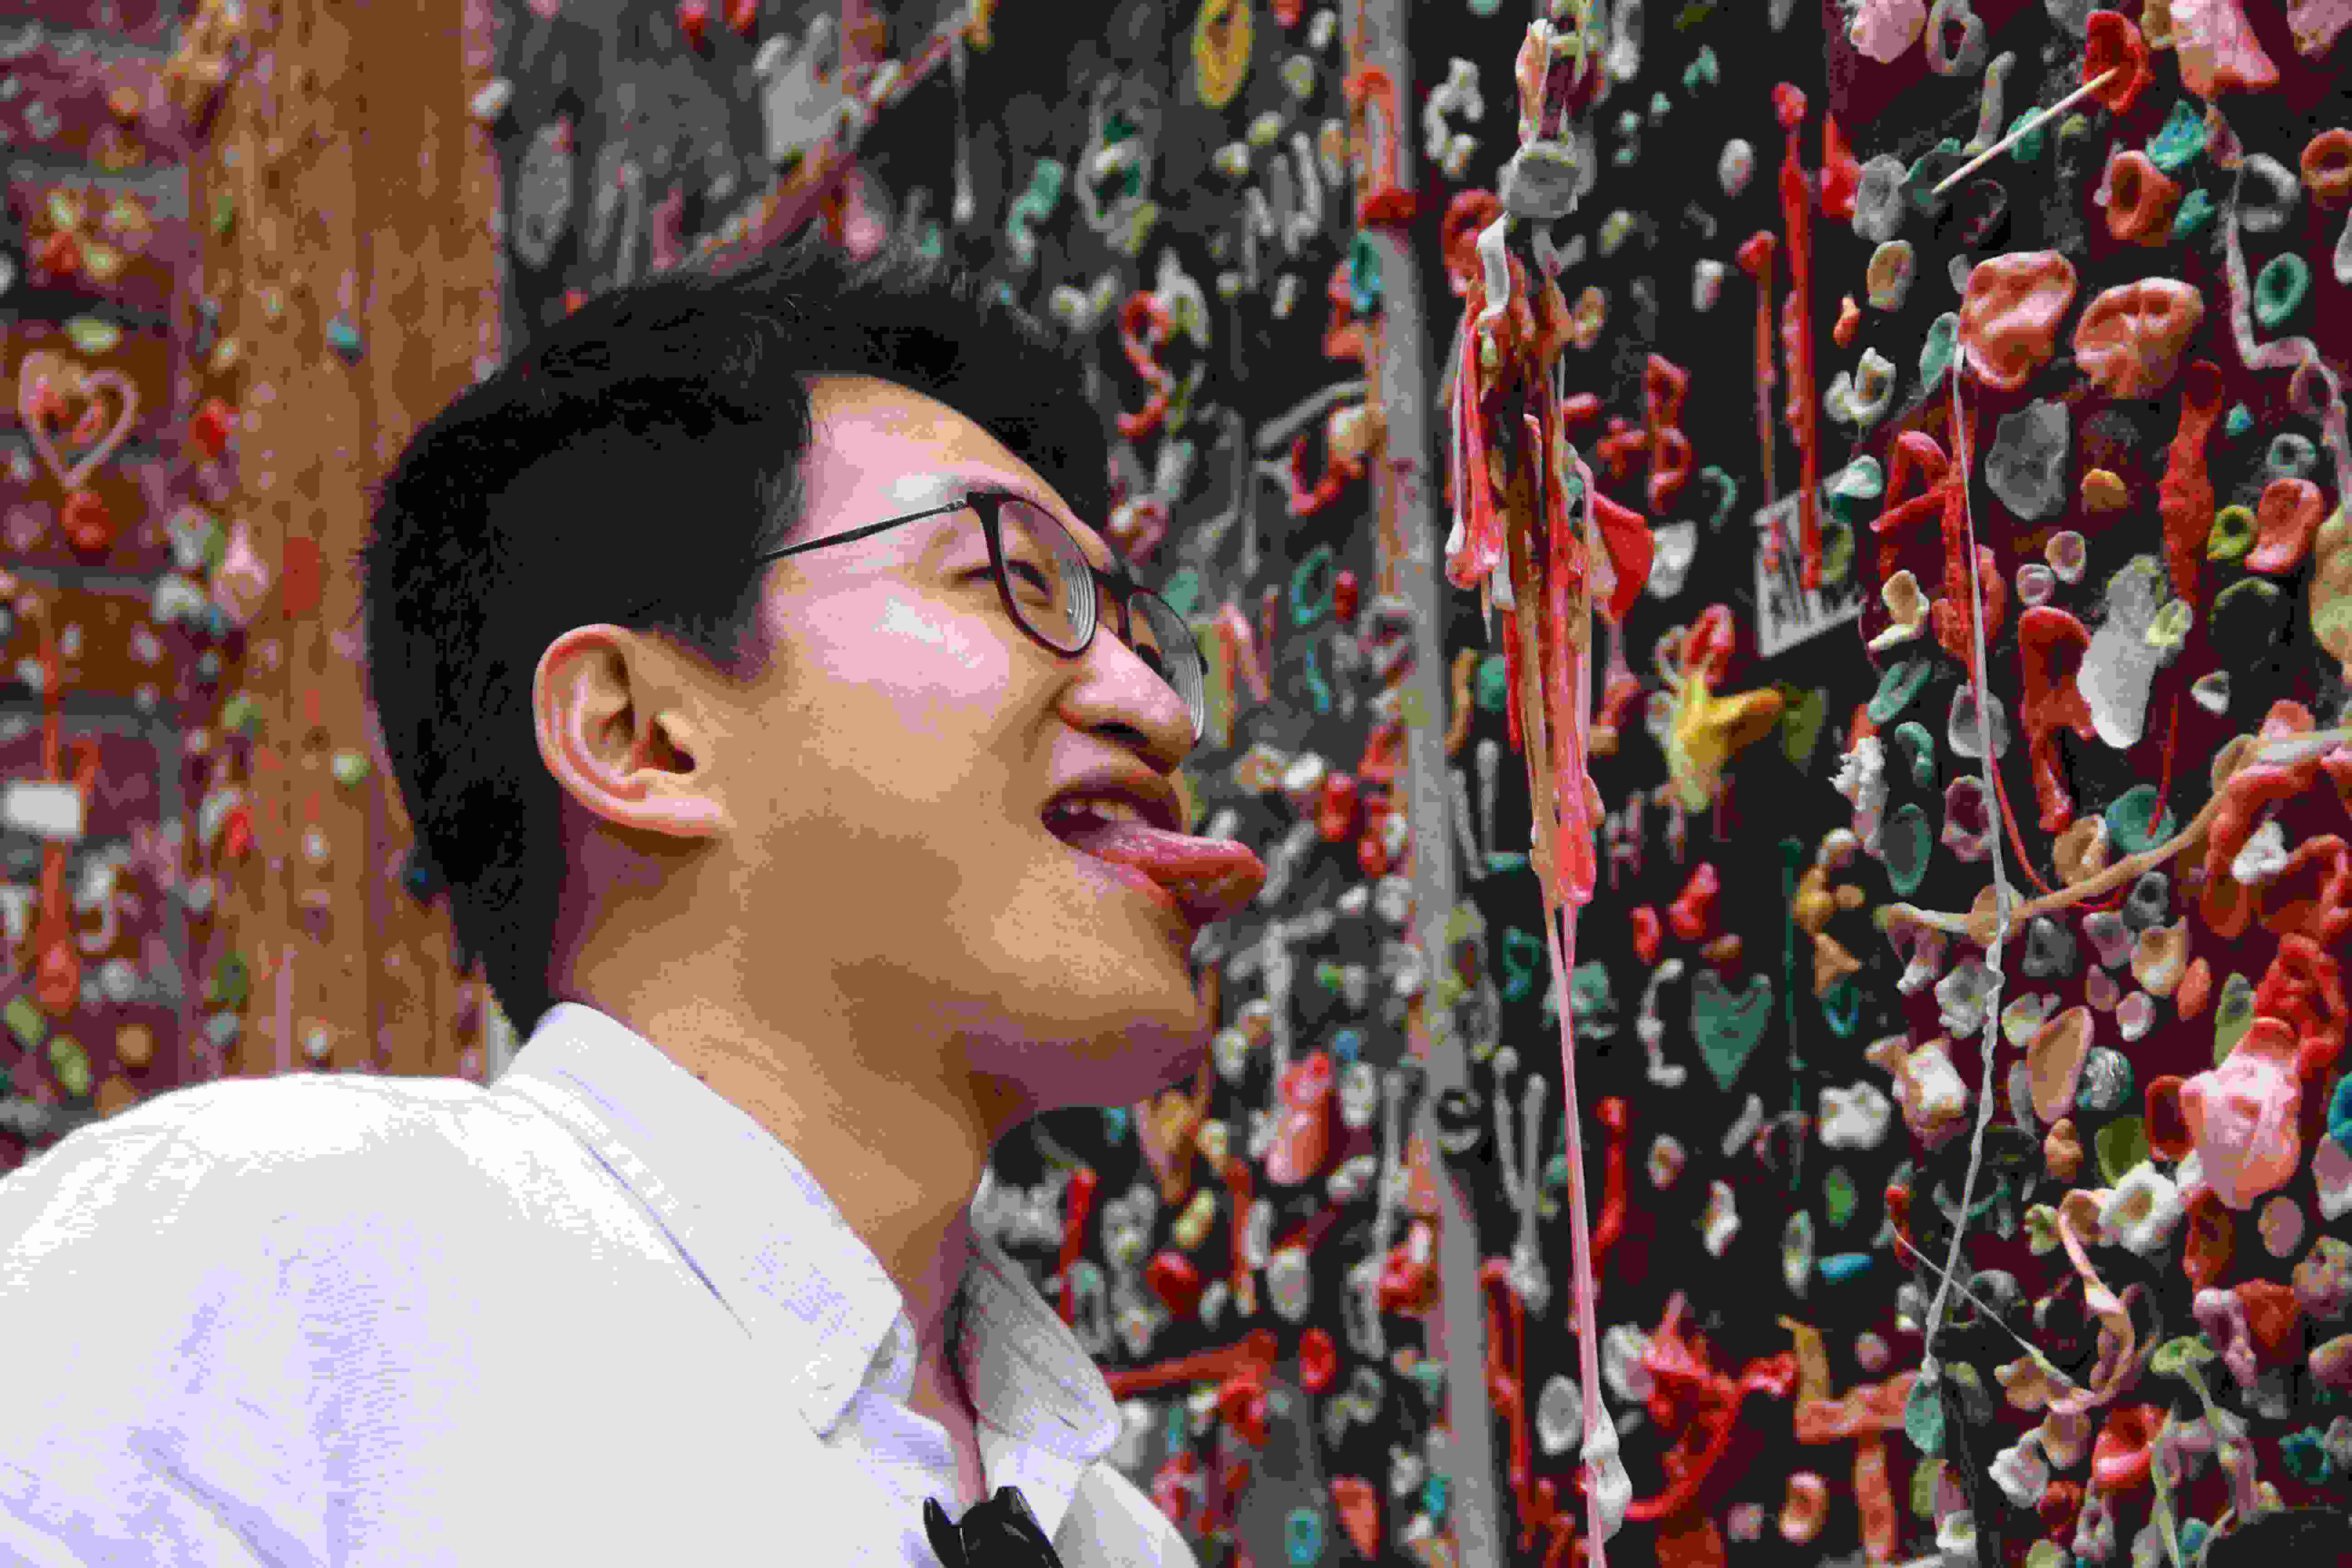 Guy licking gum at the Gum Wall